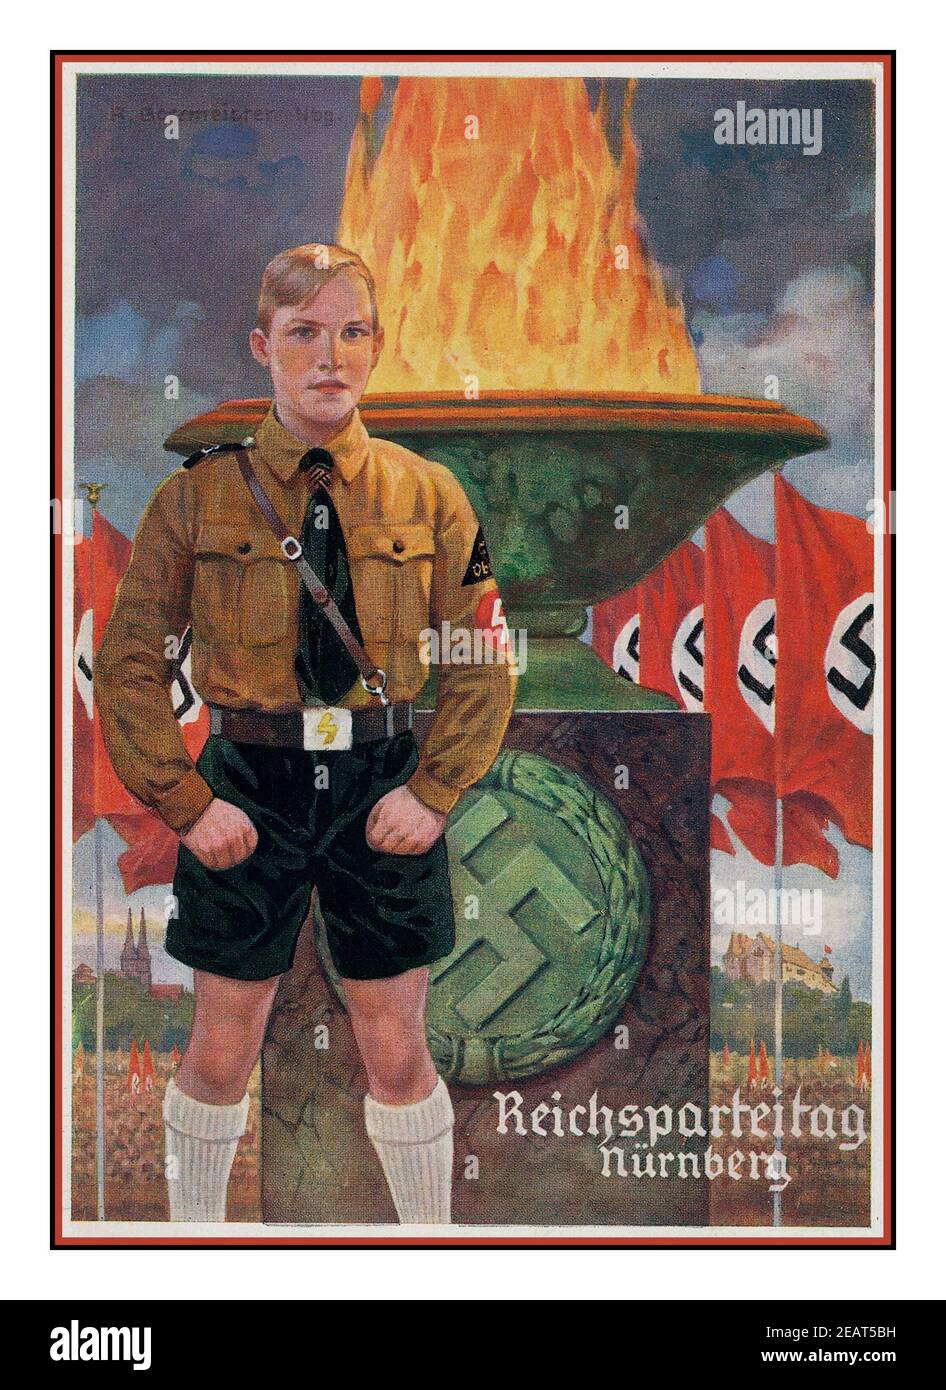 1937, 'REICHSPARTEITAG NÜRNBERG', figure Hitler Youth boy in front of a bowl of flames with swastika flags in front of Nuremberg Castle, Verlag Photo-Hoffmann Munich Nazi Germany Stock Photo